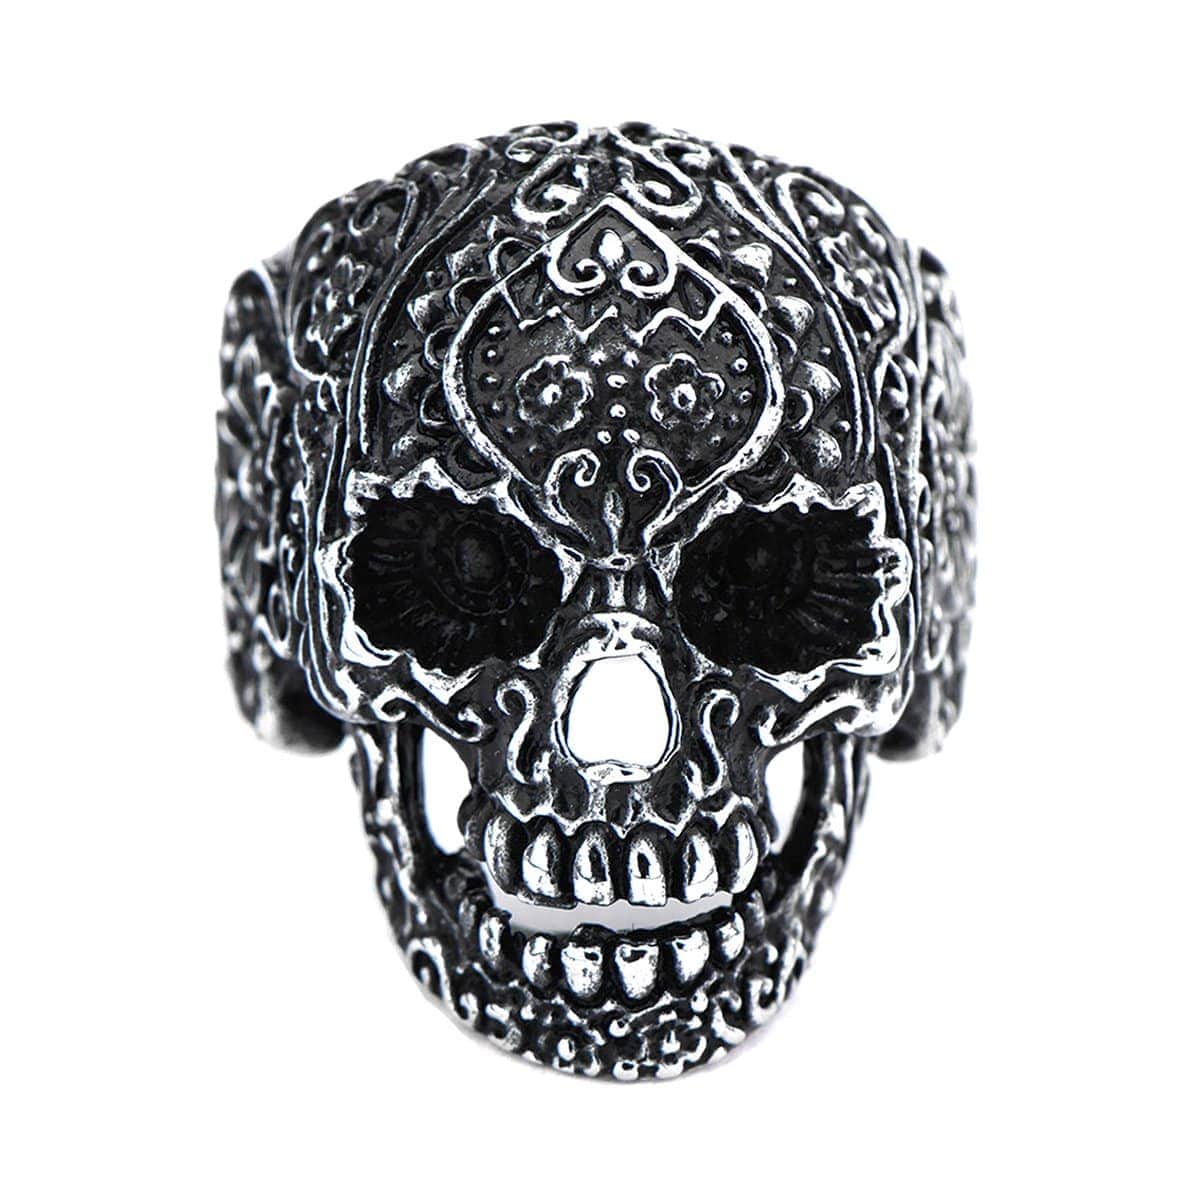 INOX JEWELRY Rings Antiqued Silver Tone Stainless Steel Full Tattooed Skull Ring